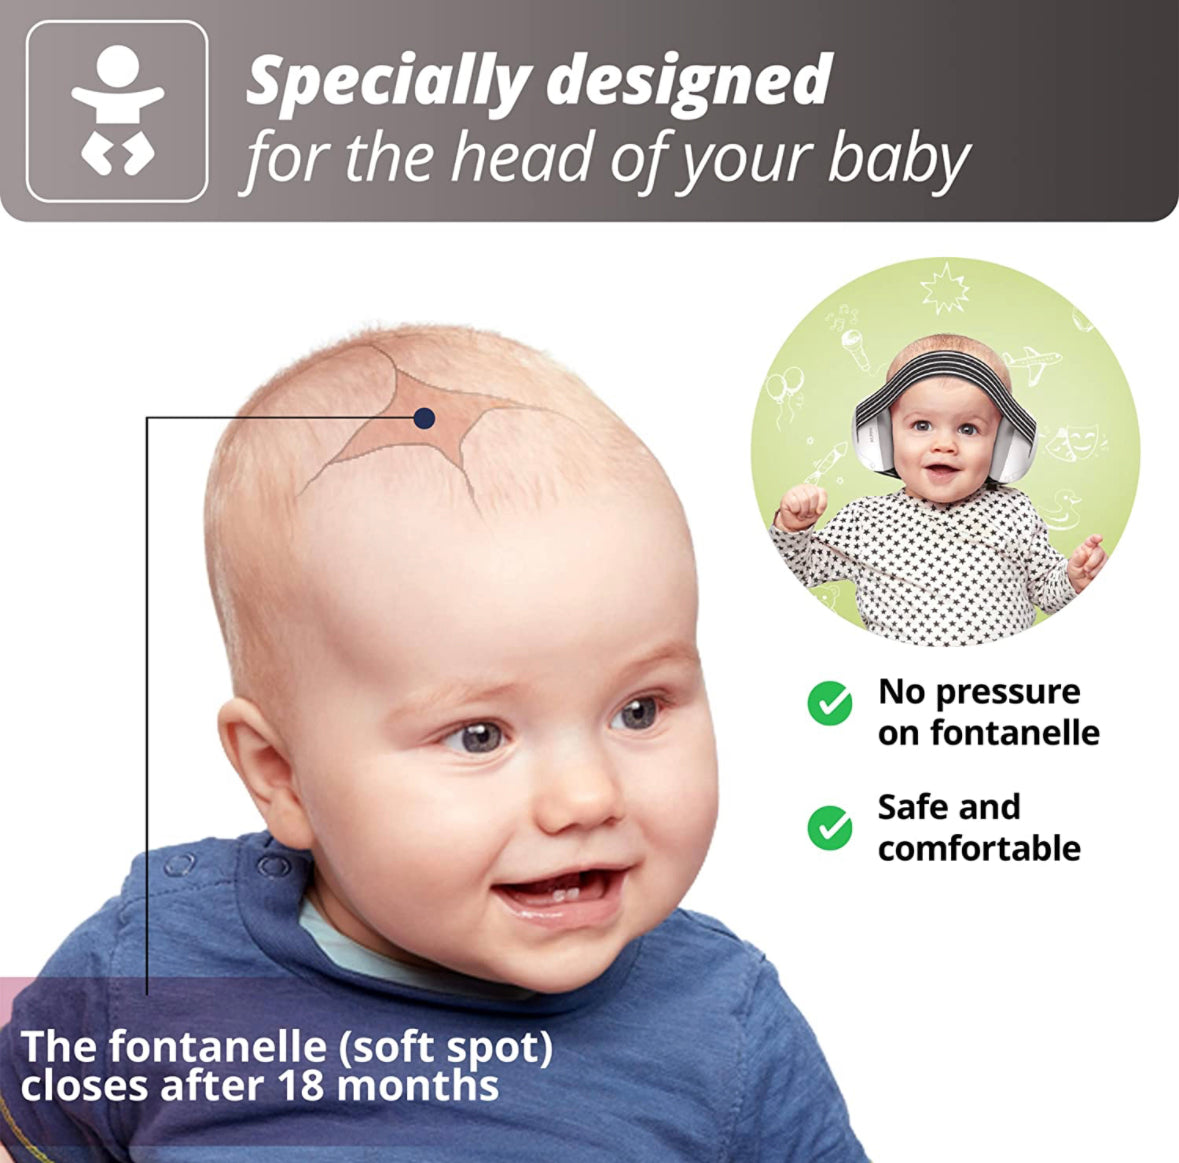 Alpine Muffy Baby Ear Protection for Babies and Toddlers up to 36 Months.